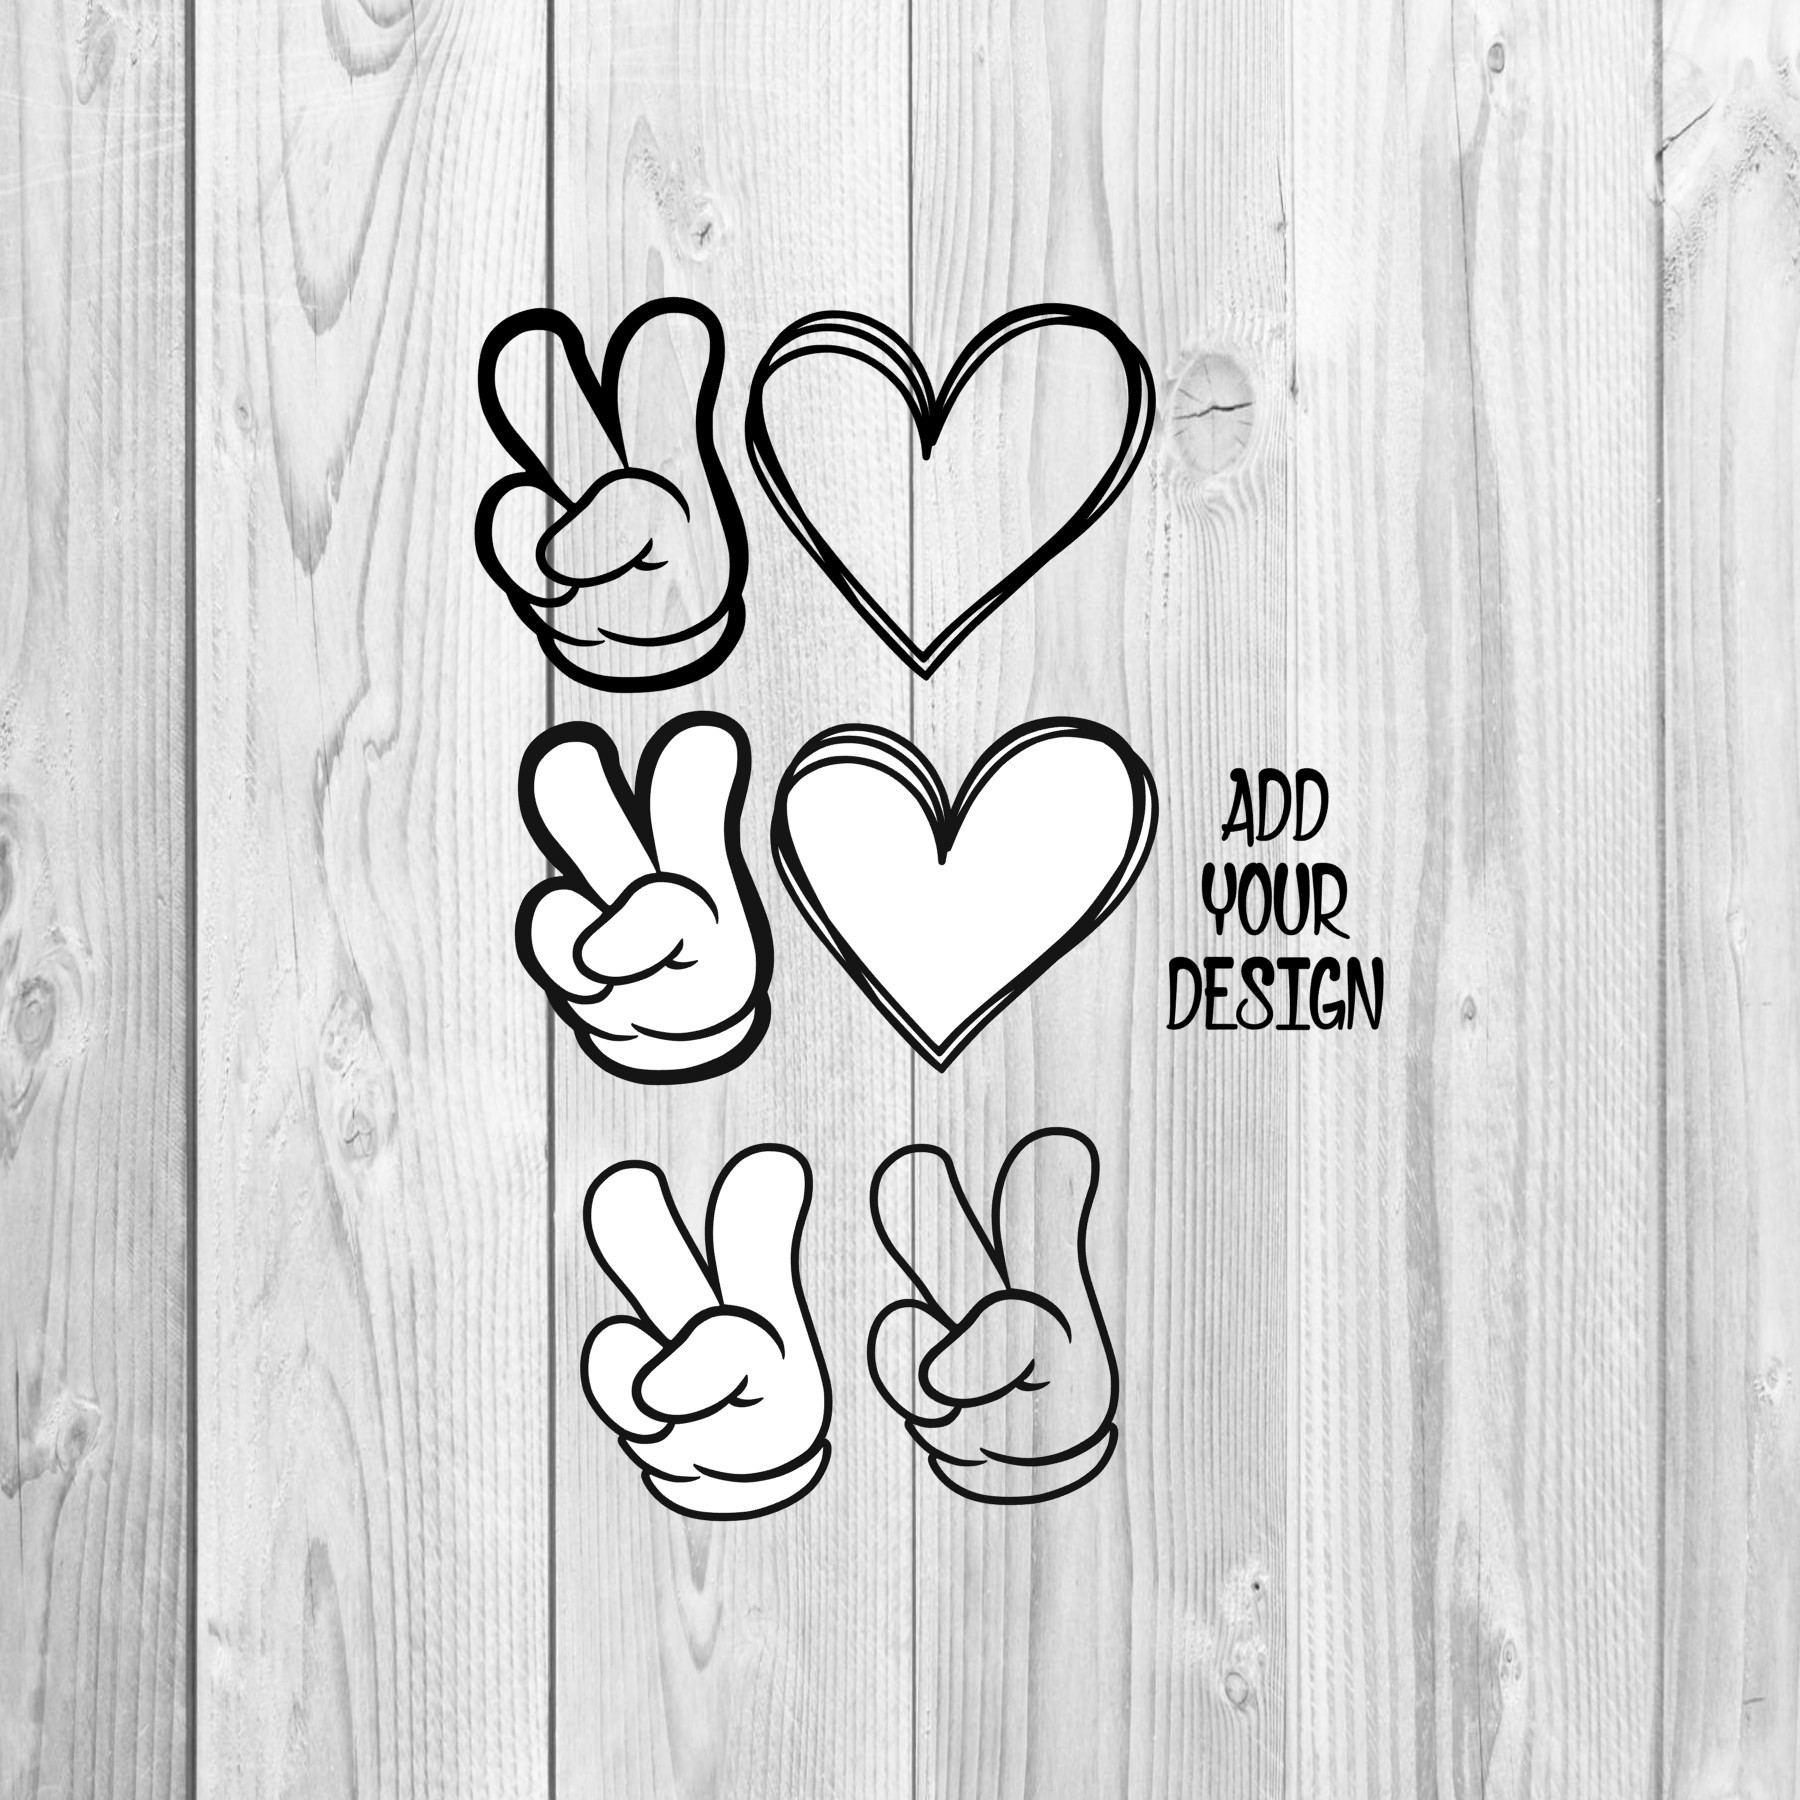 Art & Collectibles :: Peace Love SVG, Hand Peace Sign SVG ...